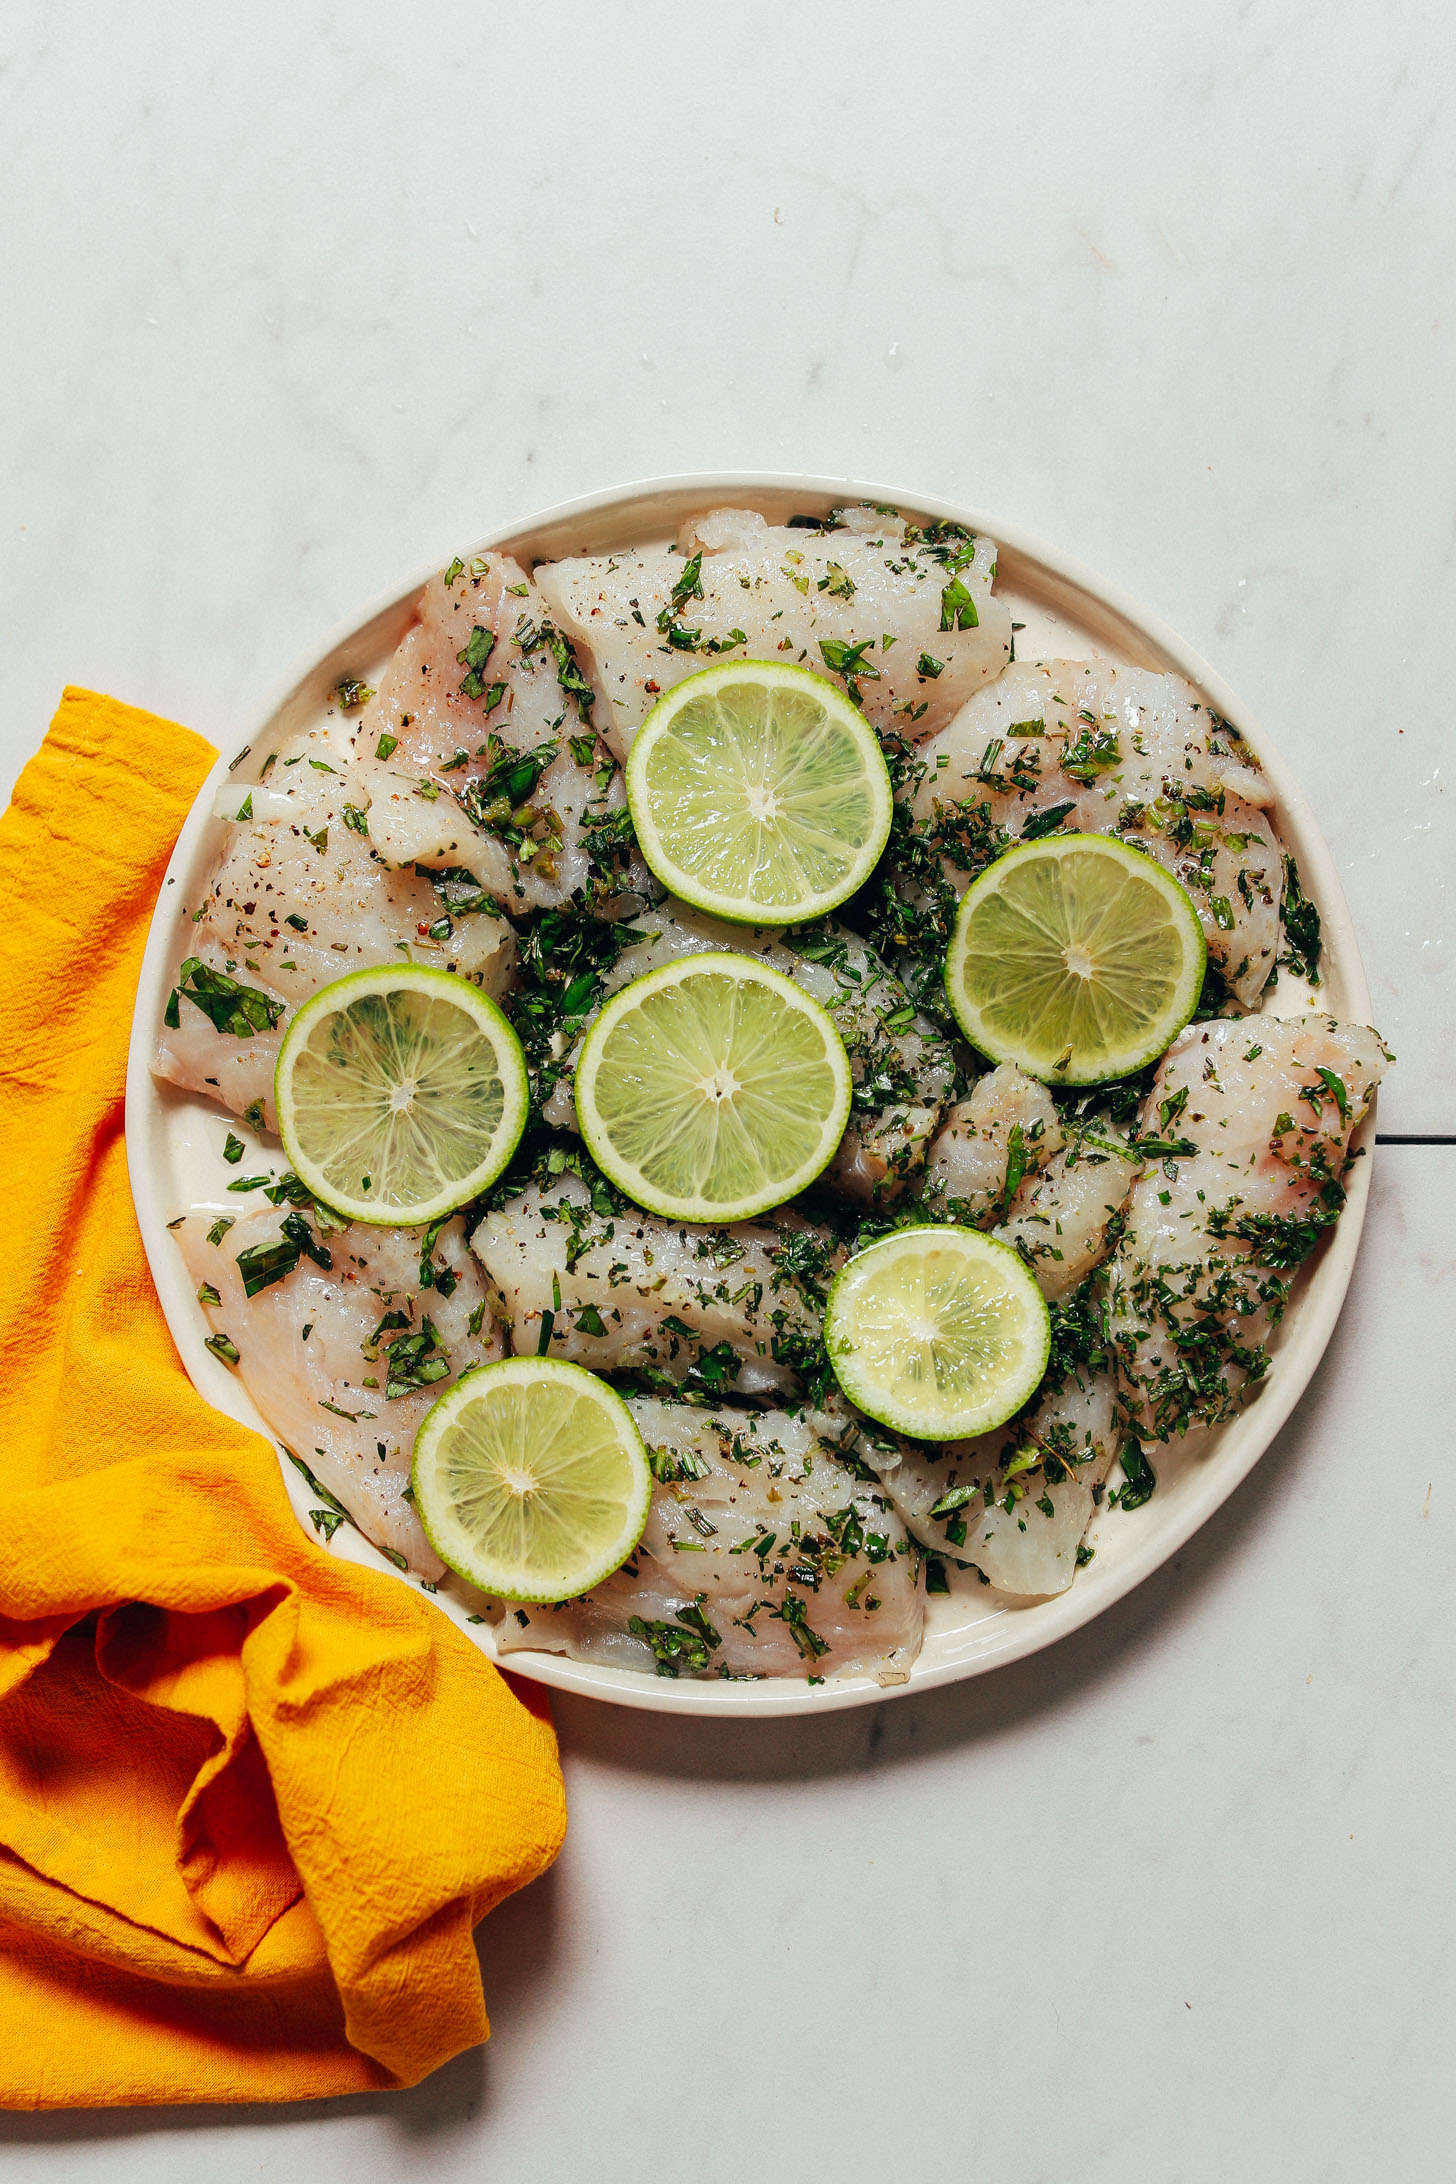 Plate of white fish coated with fresh herbs and lime slices for a delicious summer fish recipe